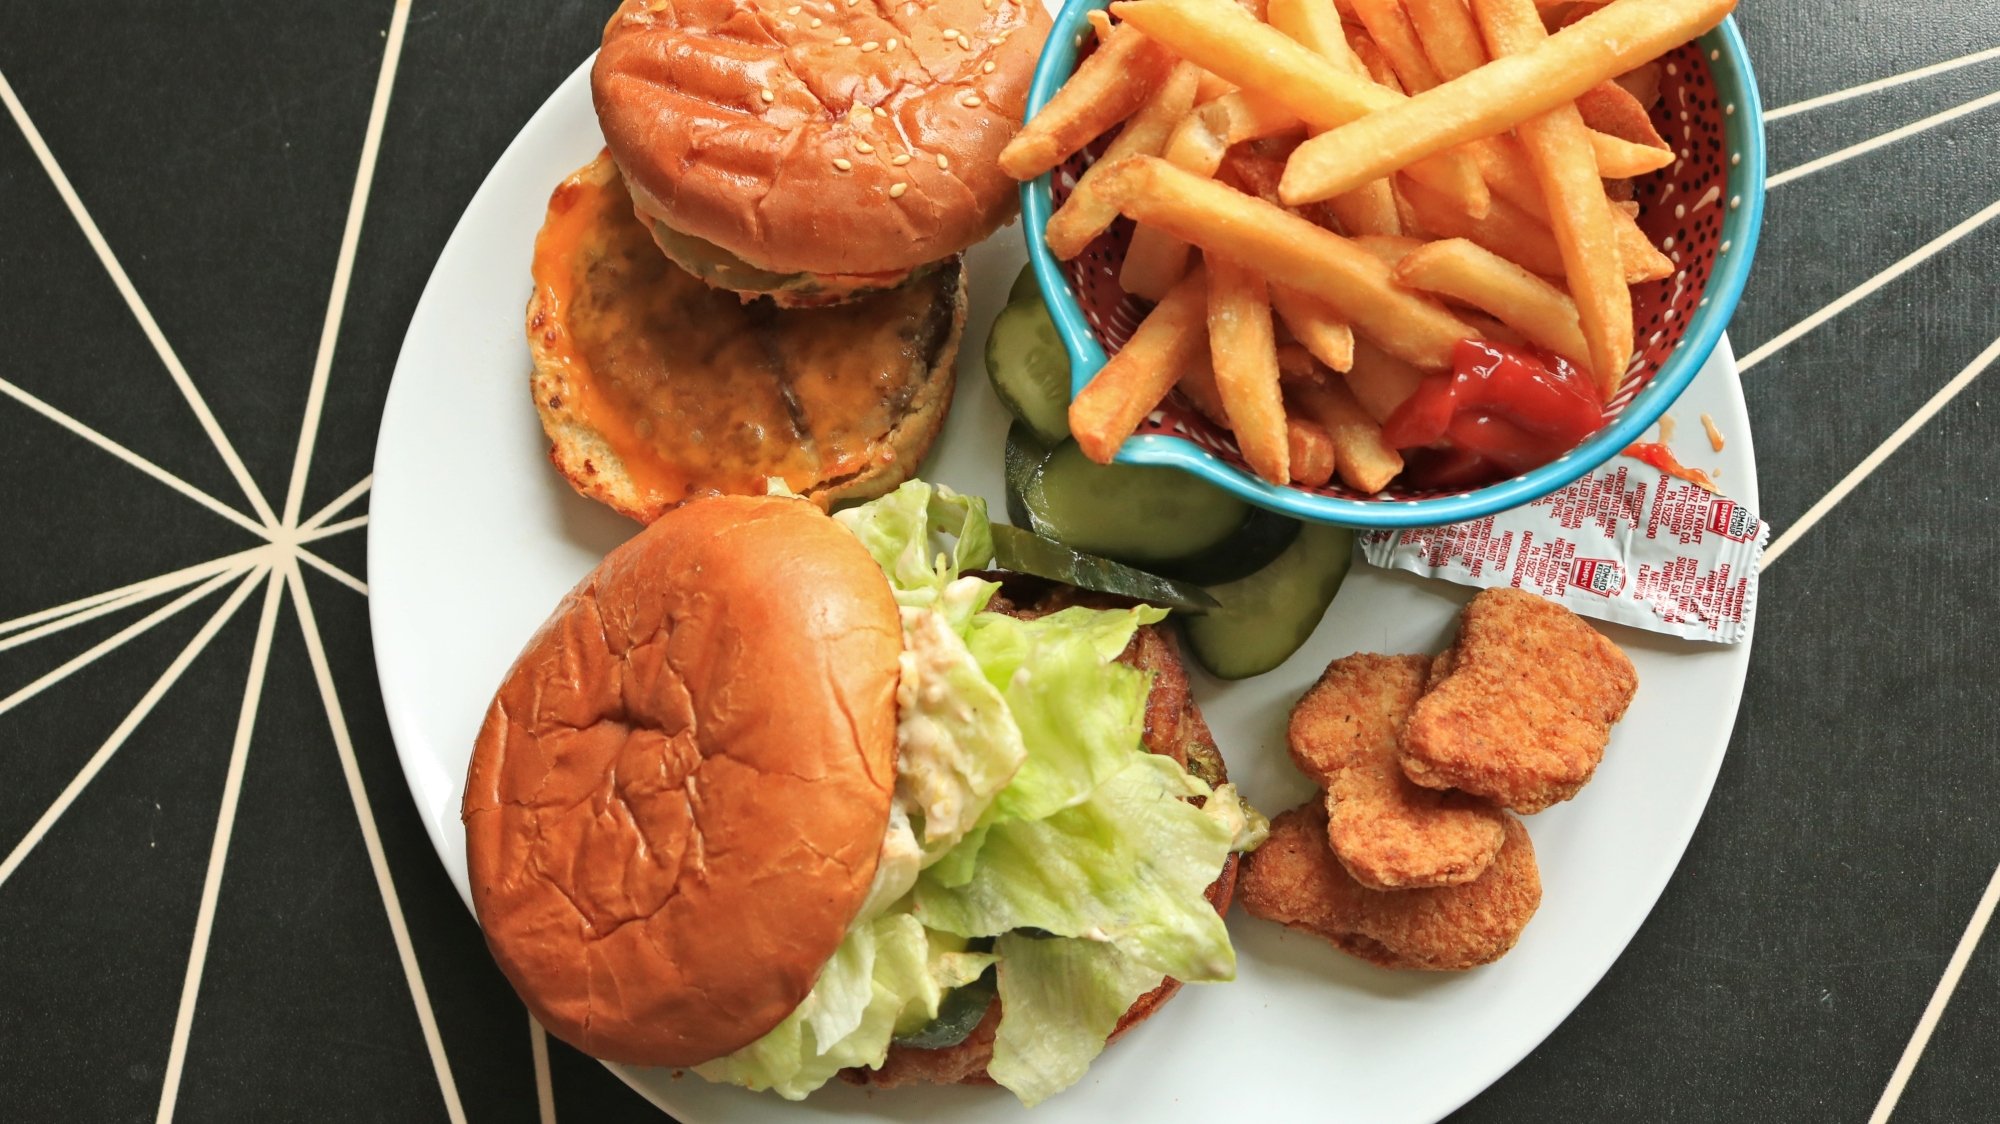 Burgers and fries on a plate with chicken nuggets and fries.